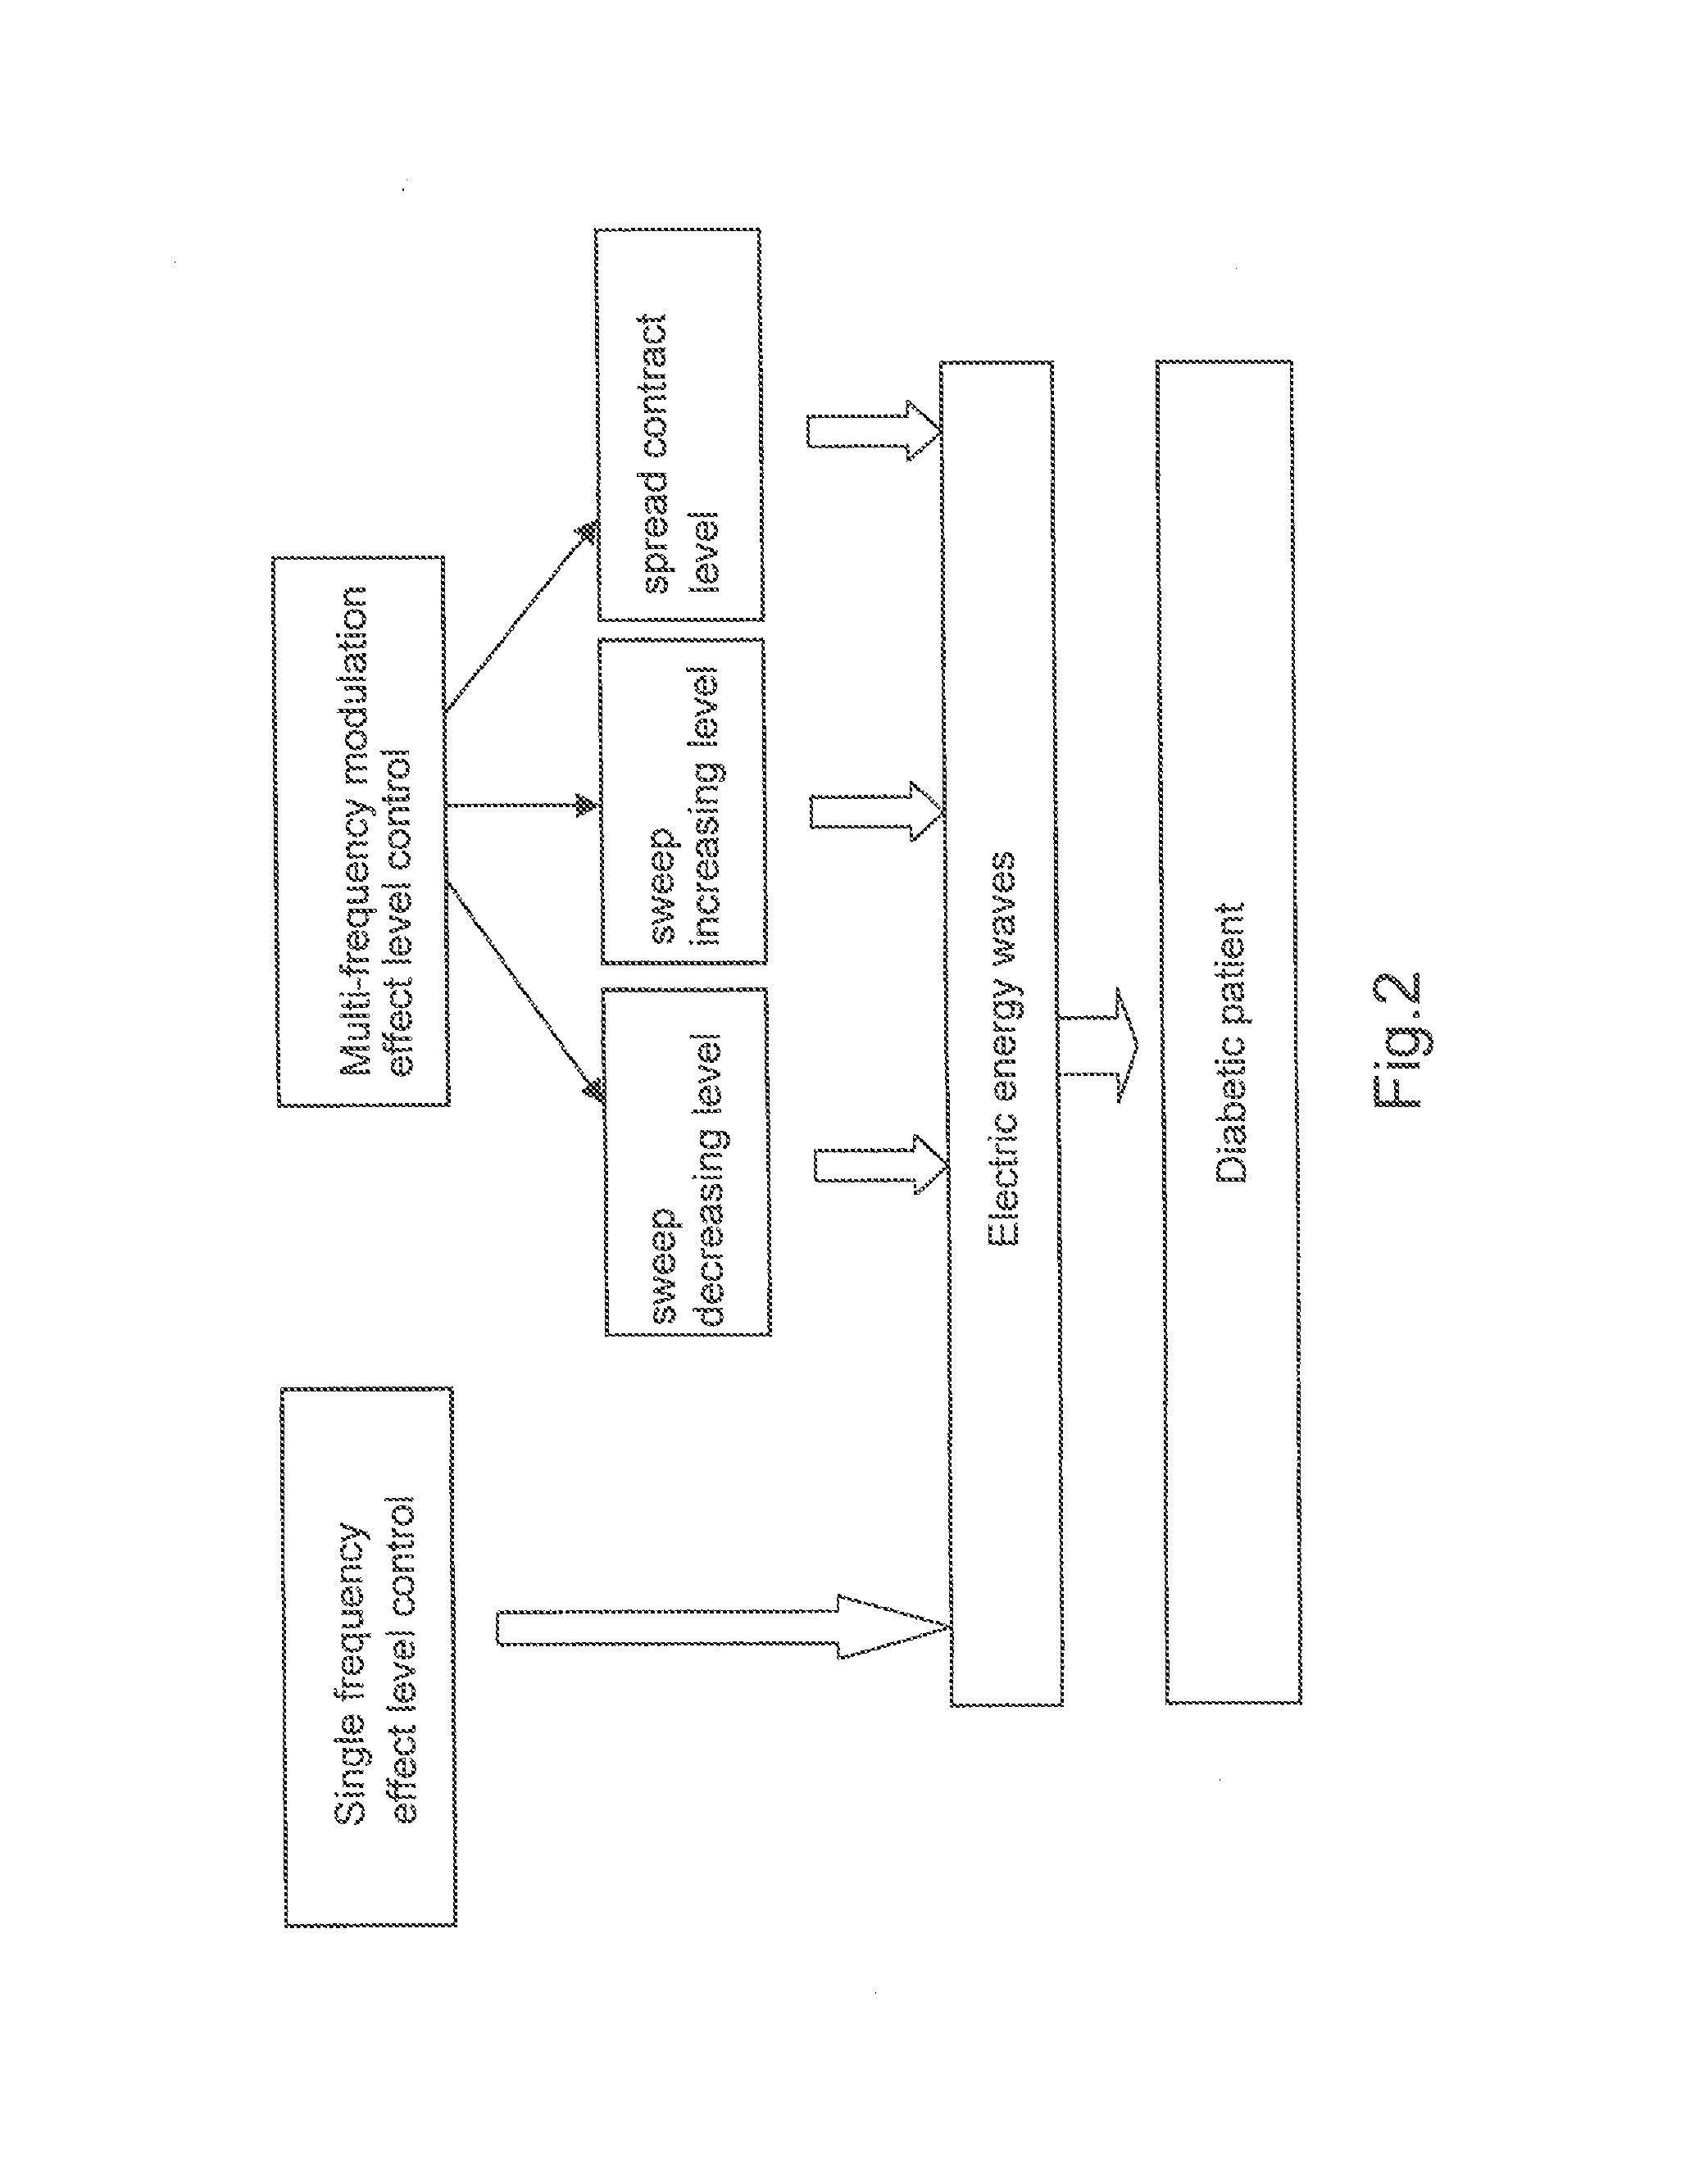 Diabetes glucagon mitigation system and method with an electrical energy wave generator